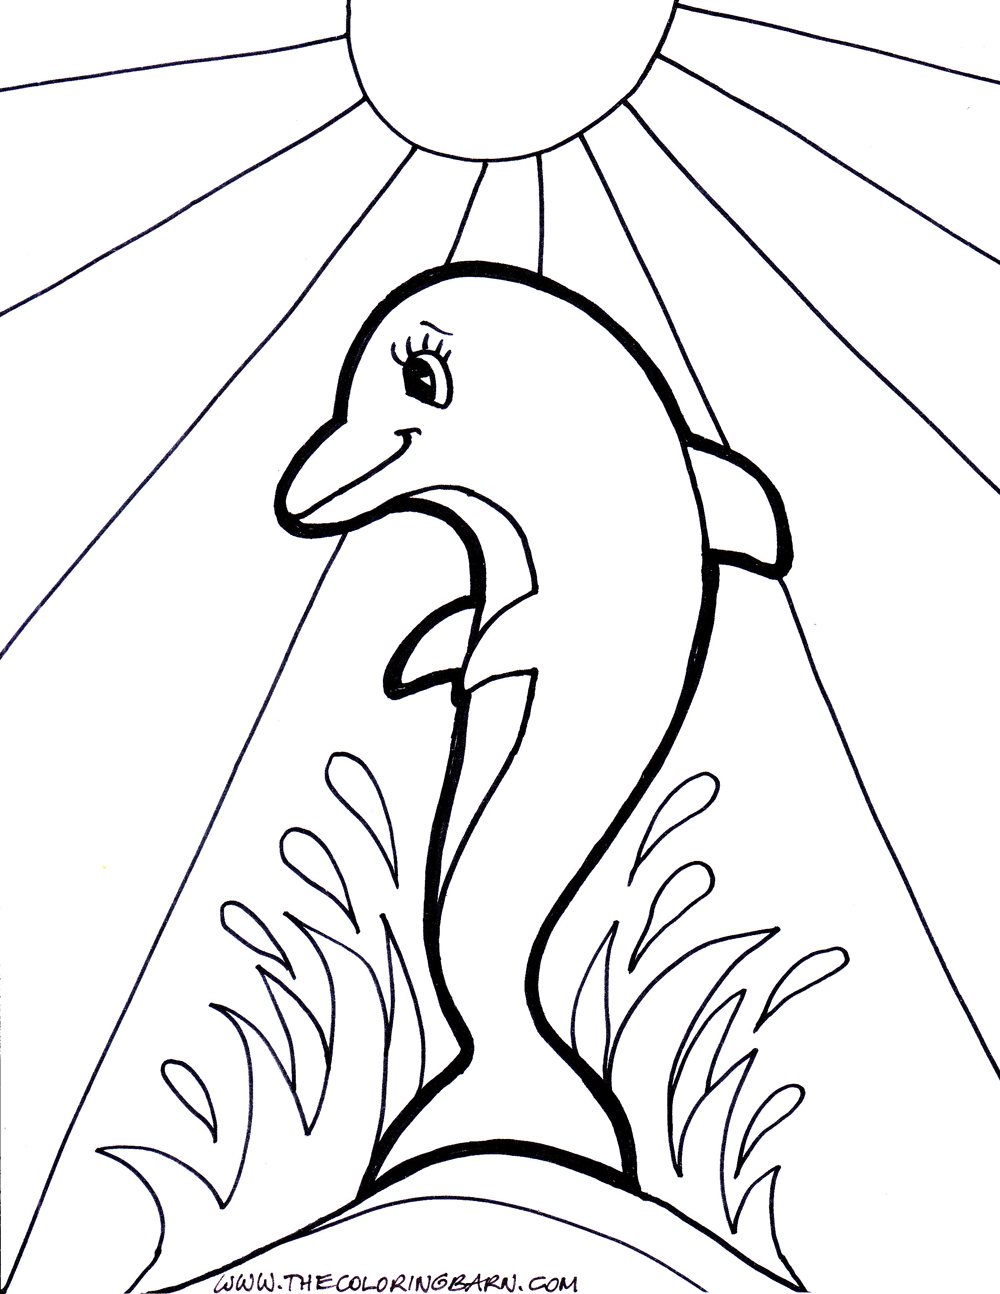 Dolphin Coloring Pages To Print Out at GetDrawings | Free ...